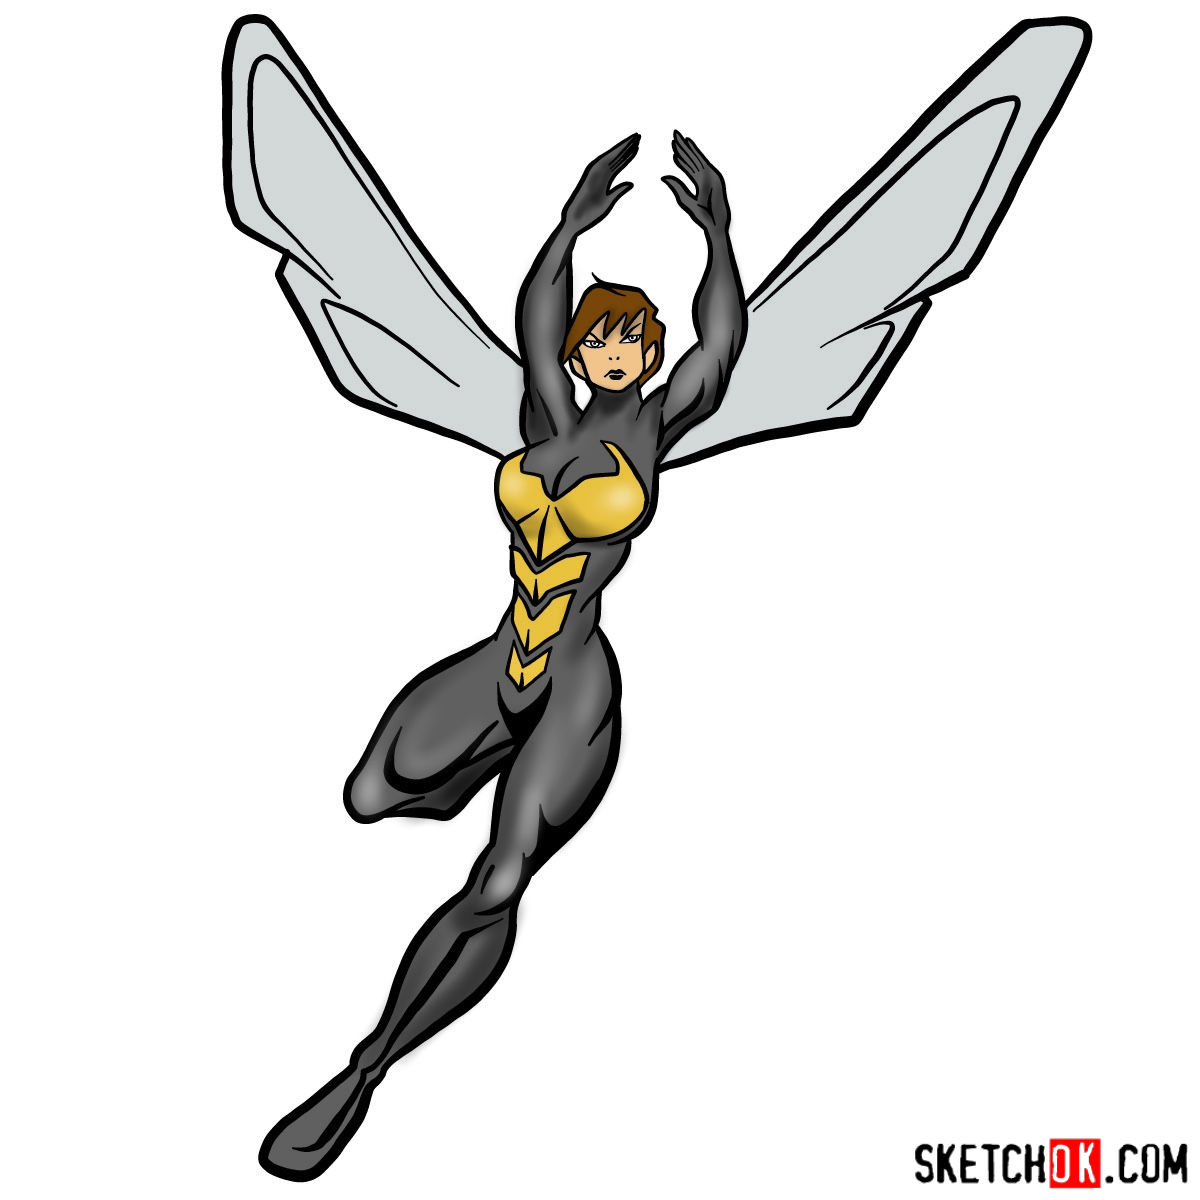 How to draw Wasp - Marvel Comics - Sketchok easy drawing guides